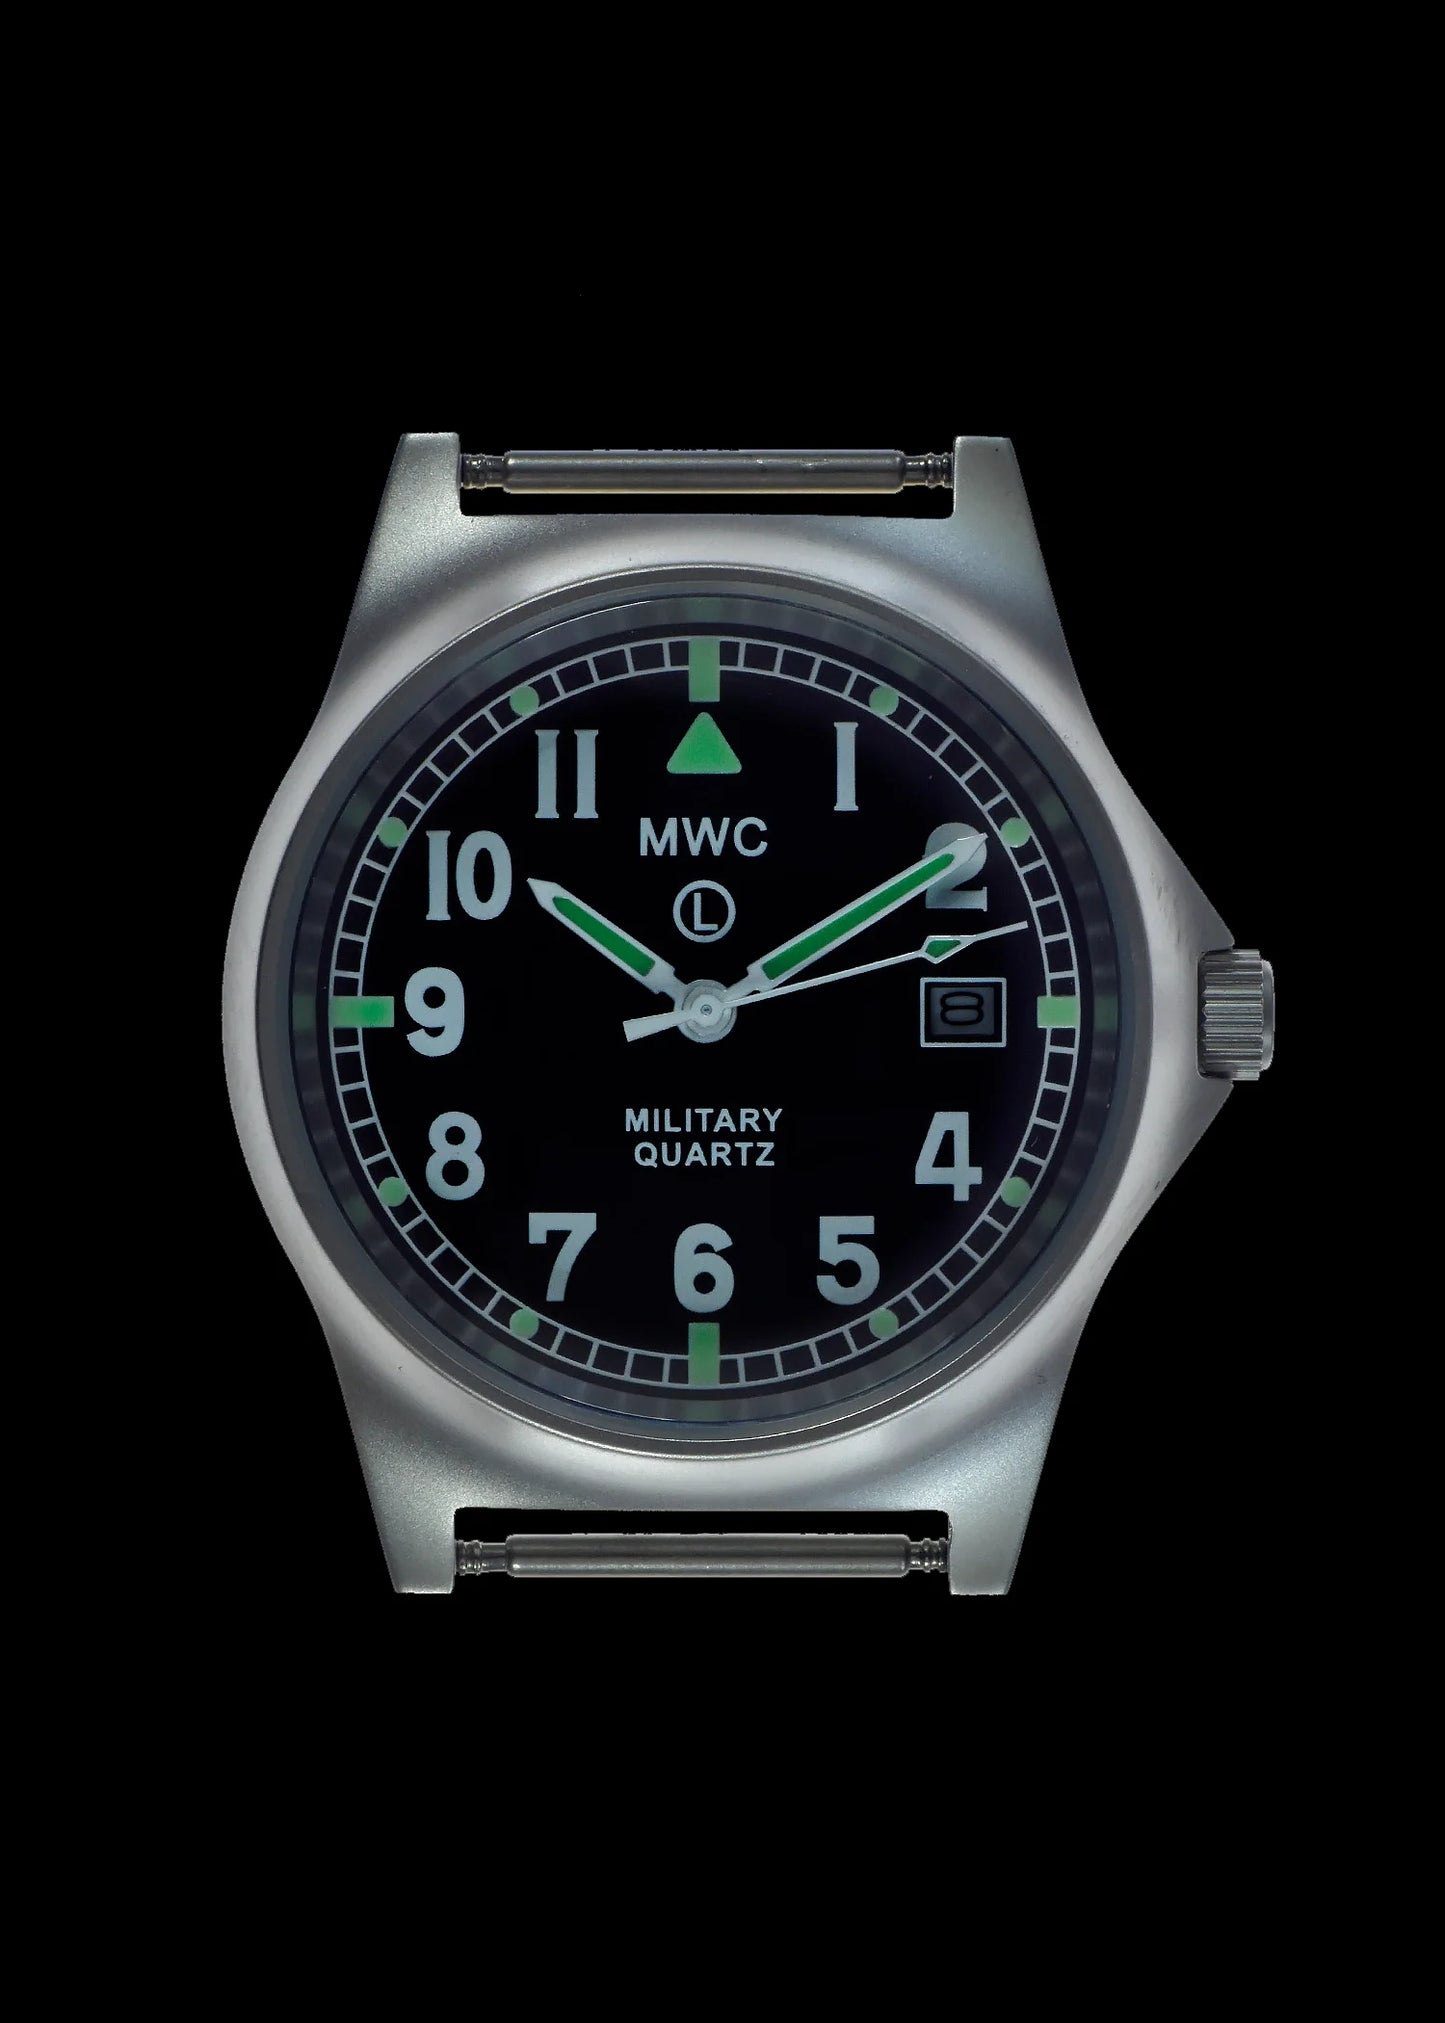 MWC G10 LM Stainless Steel Military Watch